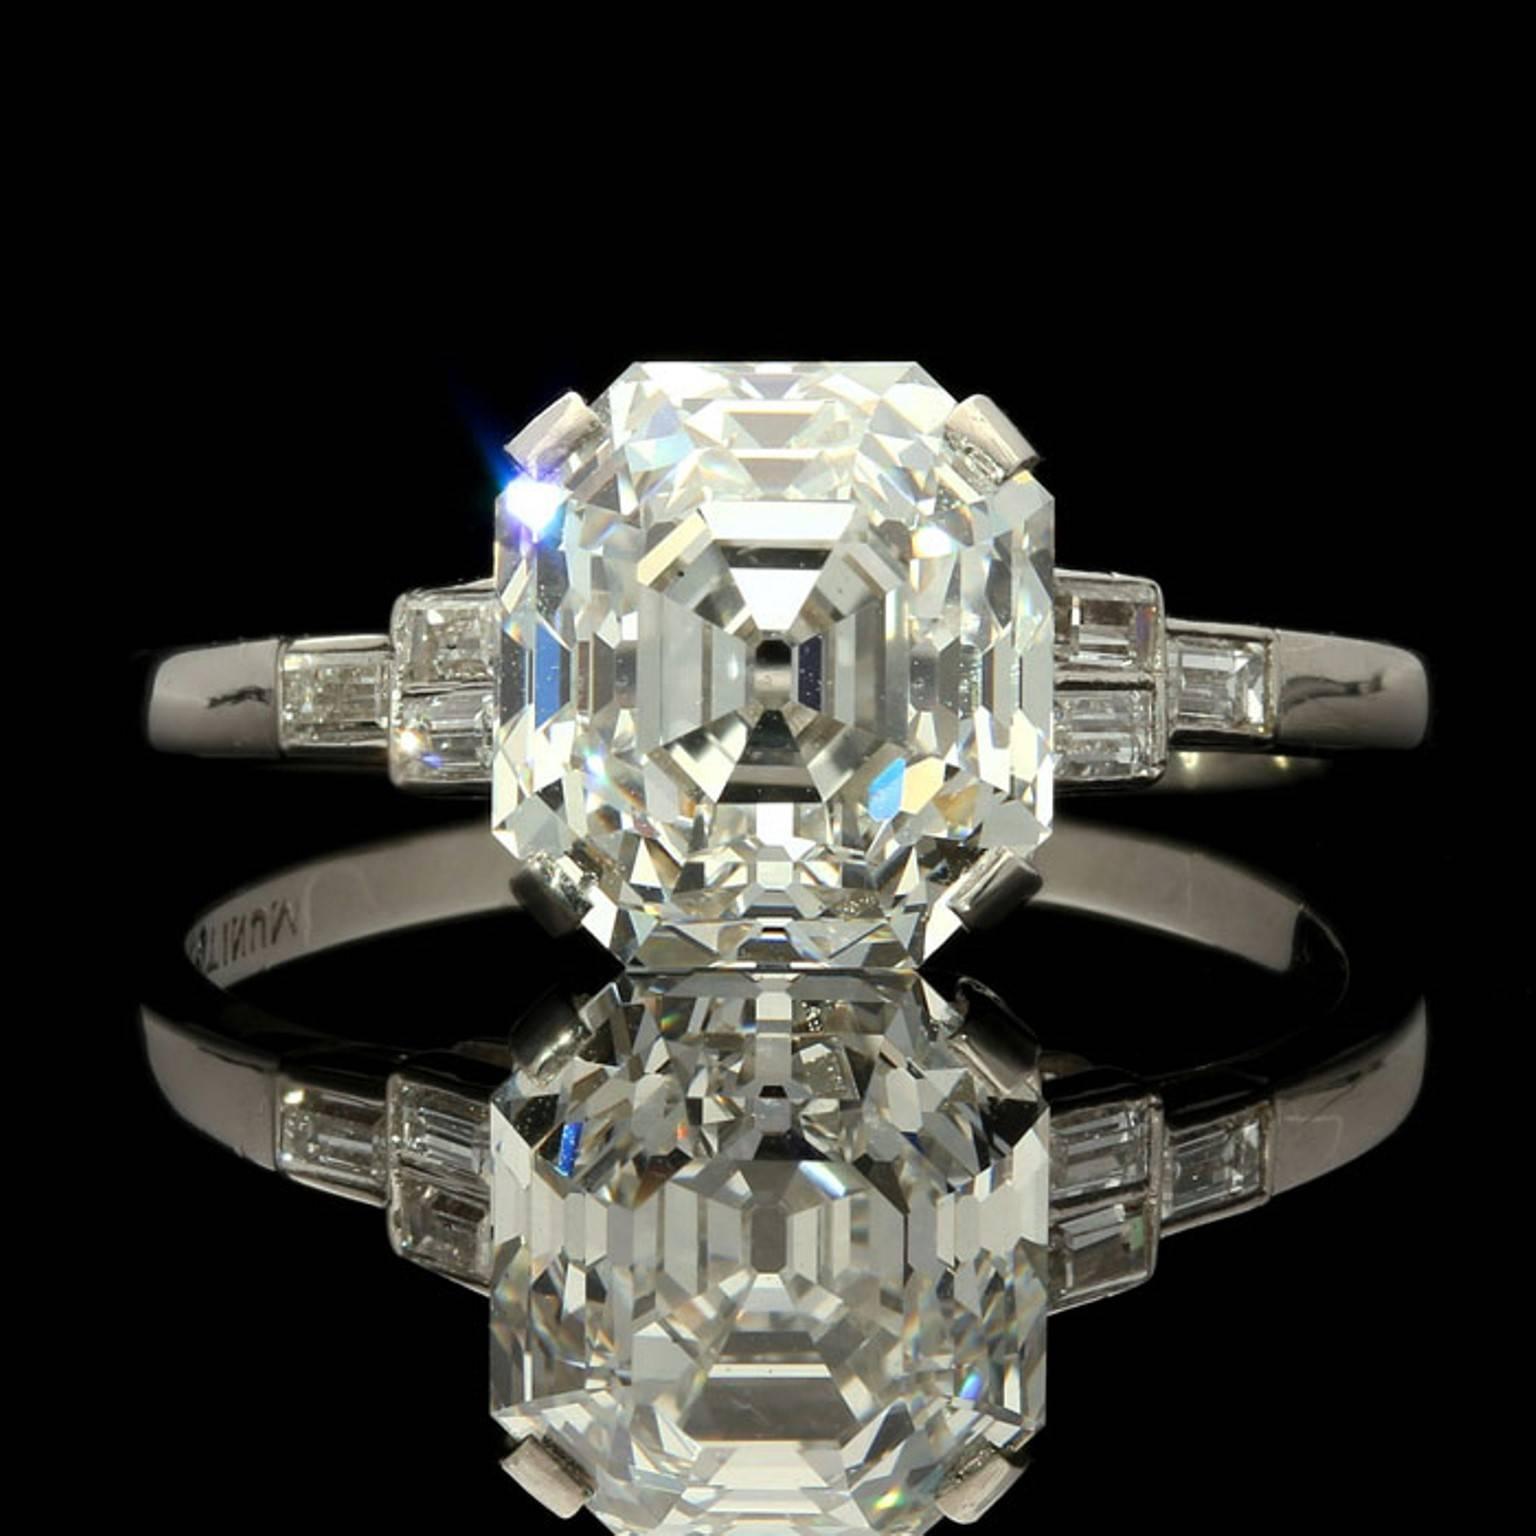 The ring centred on a beautiful early Asscher cut diamond weighing 4.09cts and of G colour and VS1 clarity corner claw set in an elegant, open, simple gallery with three baguette diamonds to each shoulder and a fine shank, all in platinum.

4.09ct